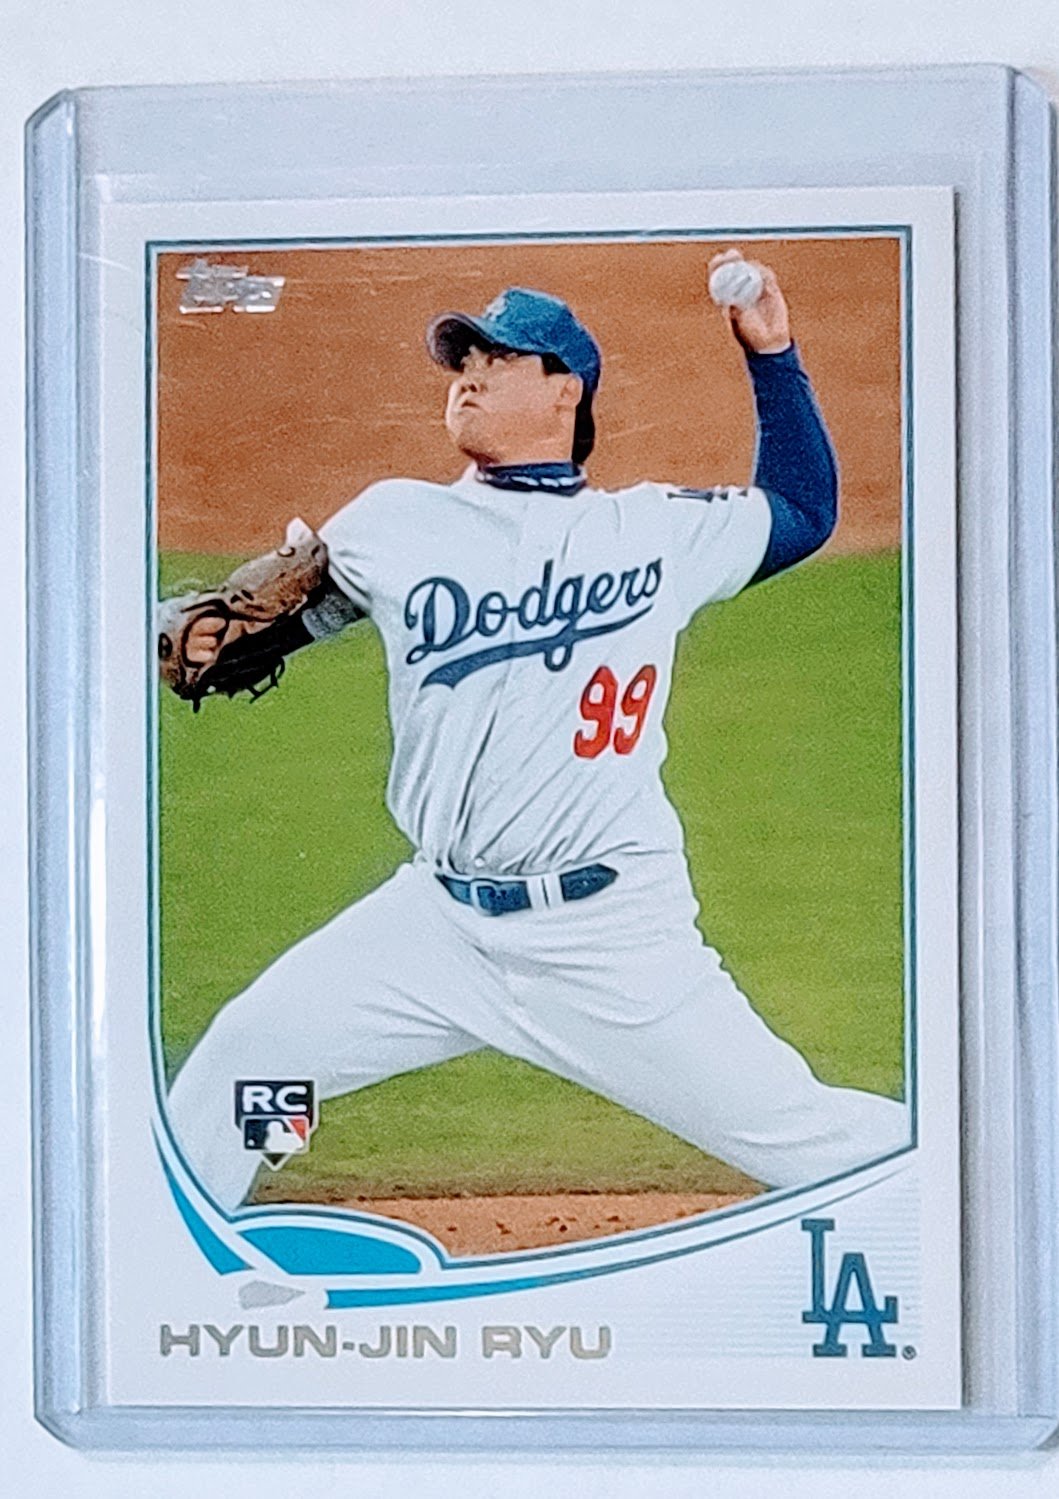 2013 Topps Hyun-Jin Ryu Rookie Baseball Trading Card TPTV simple Xclusive Collectibles   